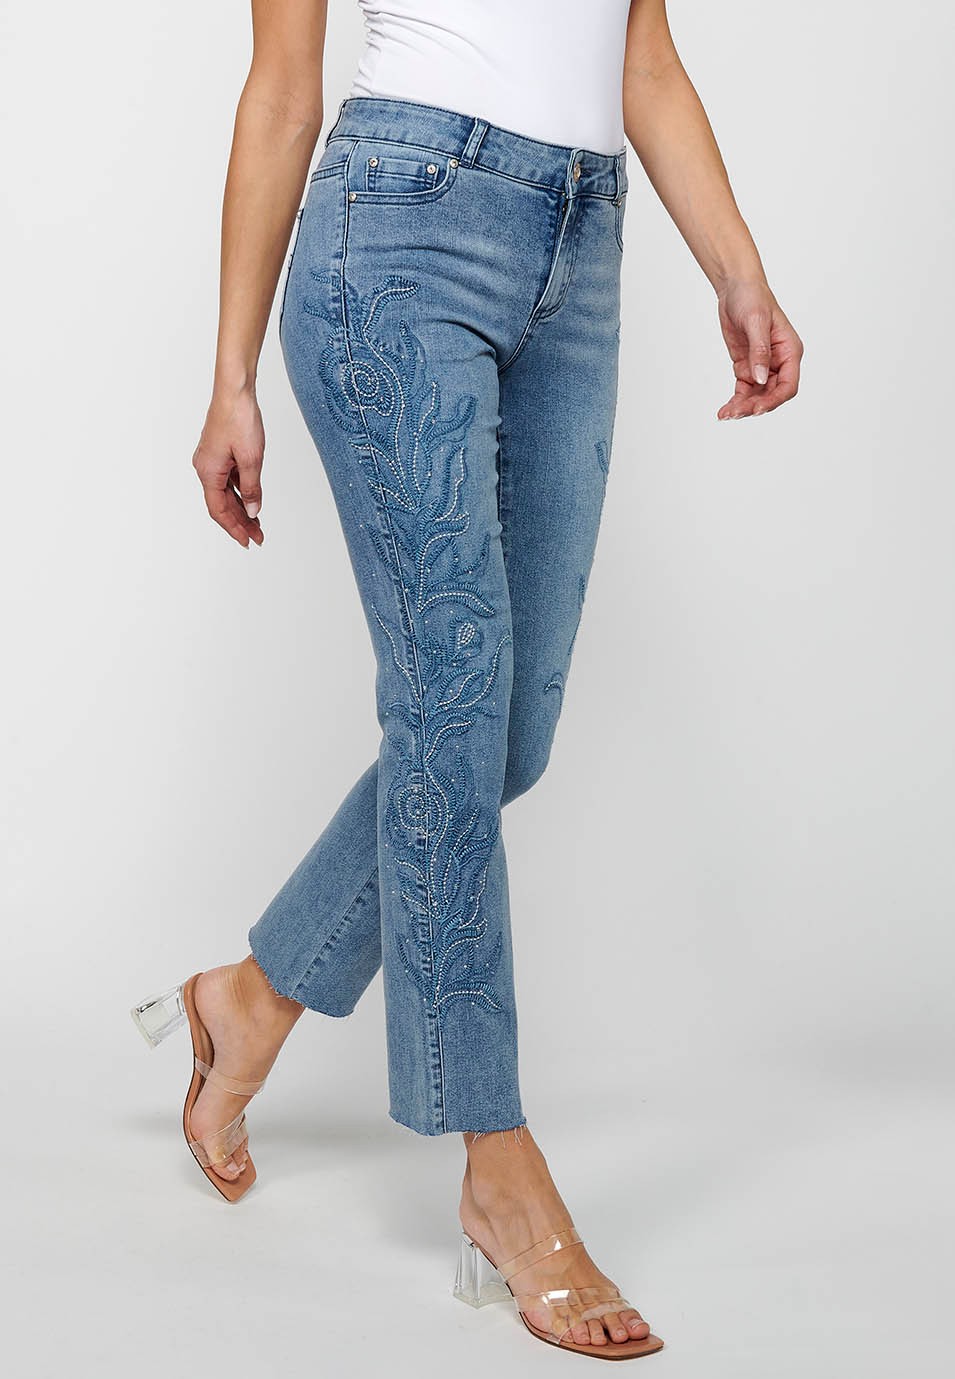 Long flared denim pants with front zipper closure and light blue floral embroidered details for women 1